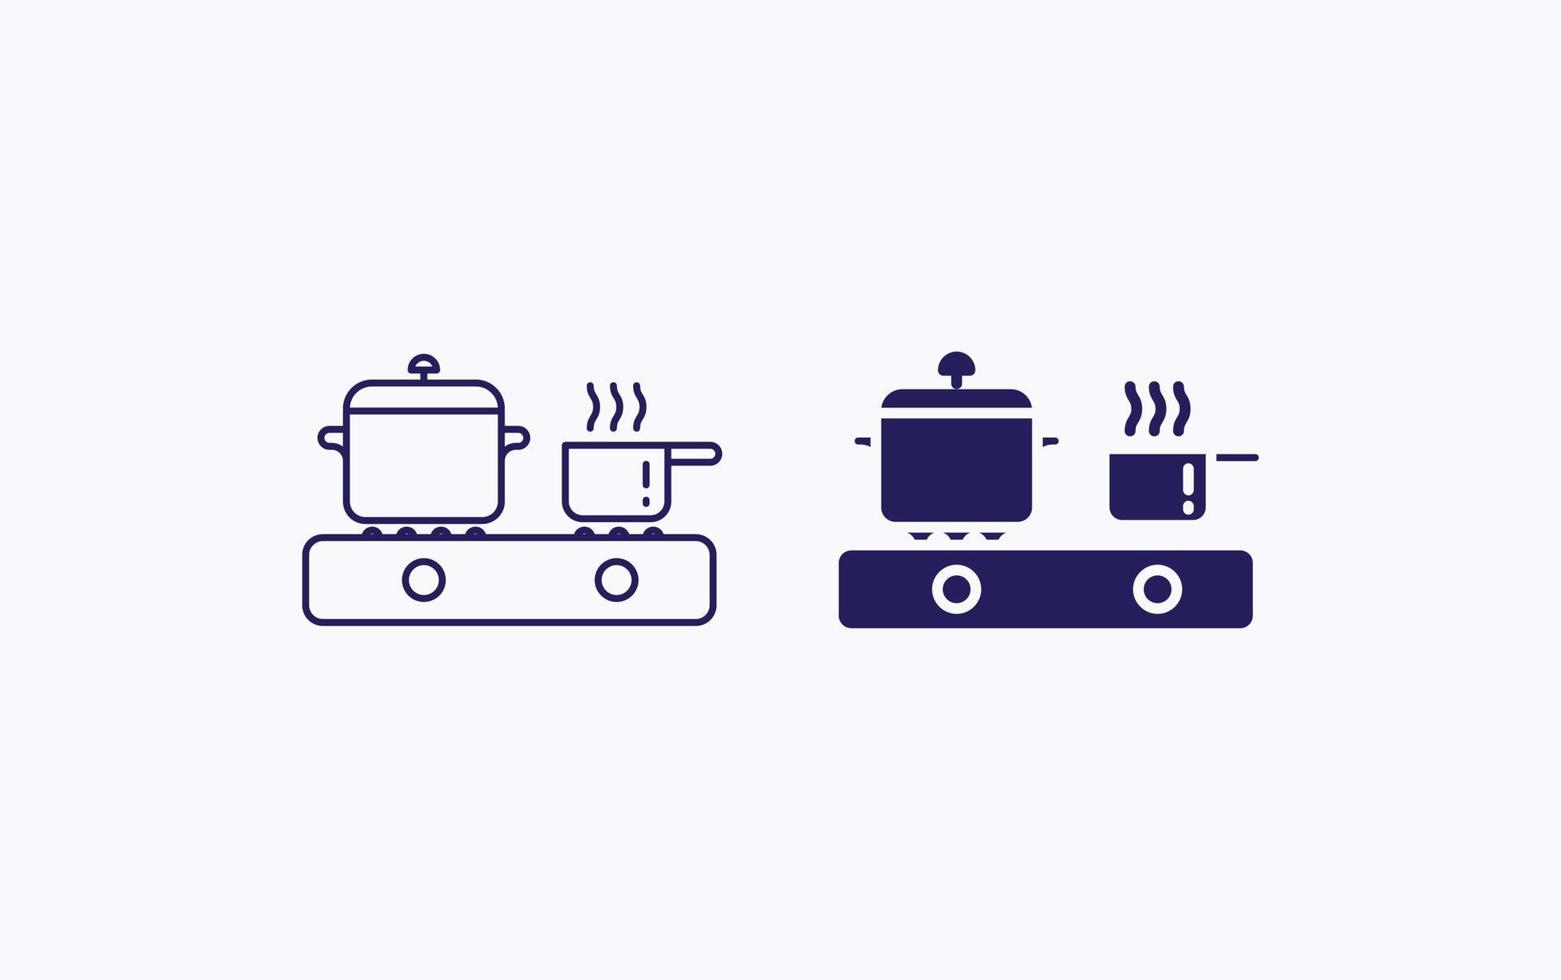 Gas Stove and Cooker illustration icon vector